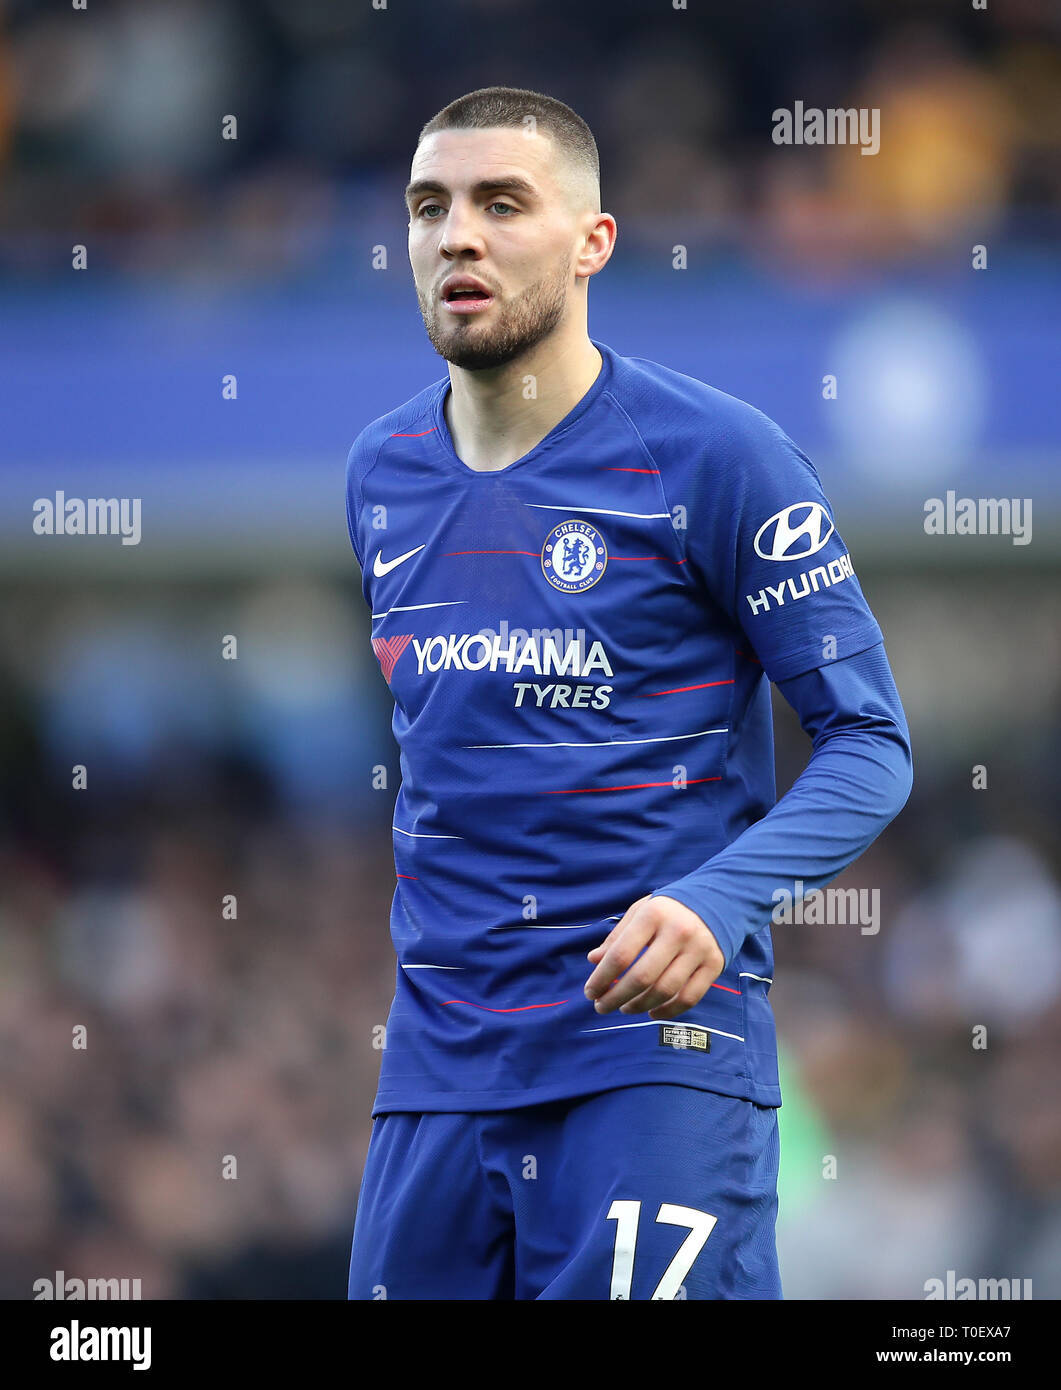 "mateo Kovacic In Action On The Field" Wallpaper